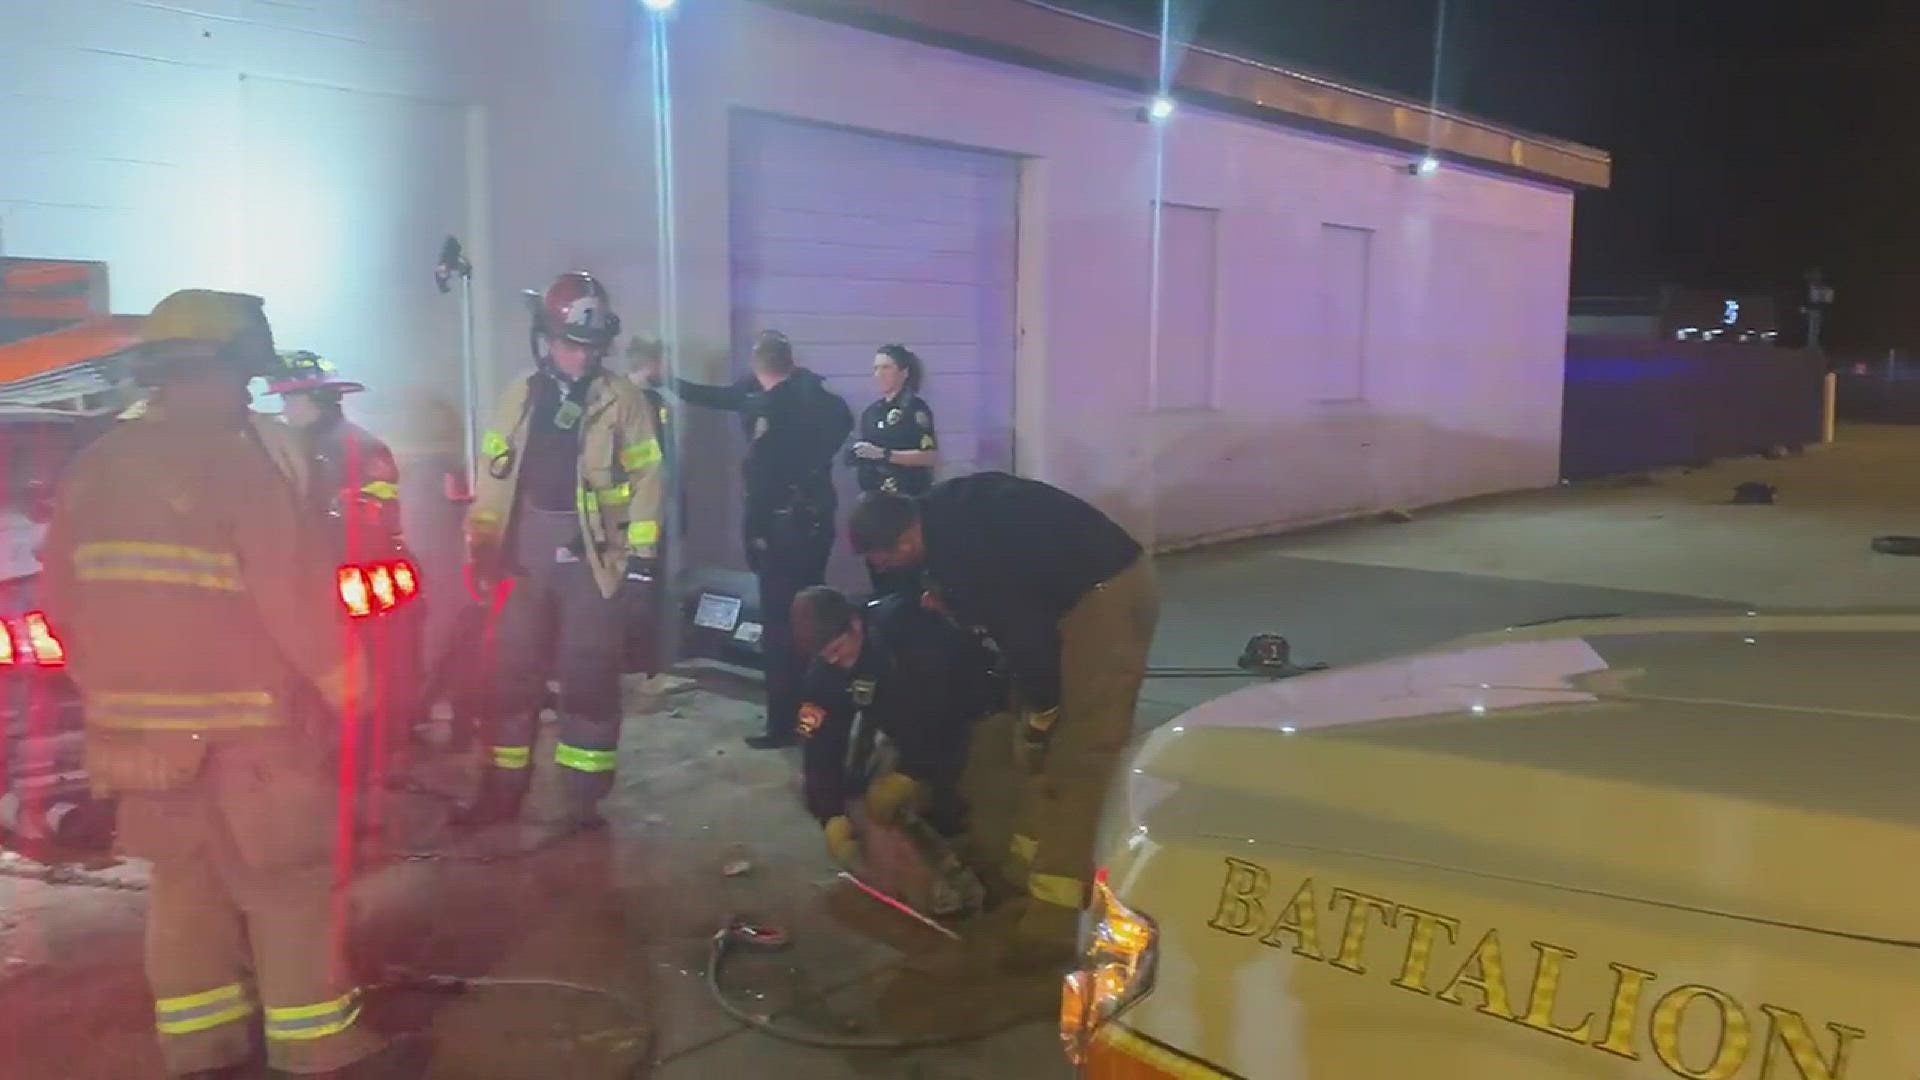 Firefighters rescued a man Wednesday night who was trapped in a car after hitting a building in Winston-Salem. Source: Winston-Salem Fire